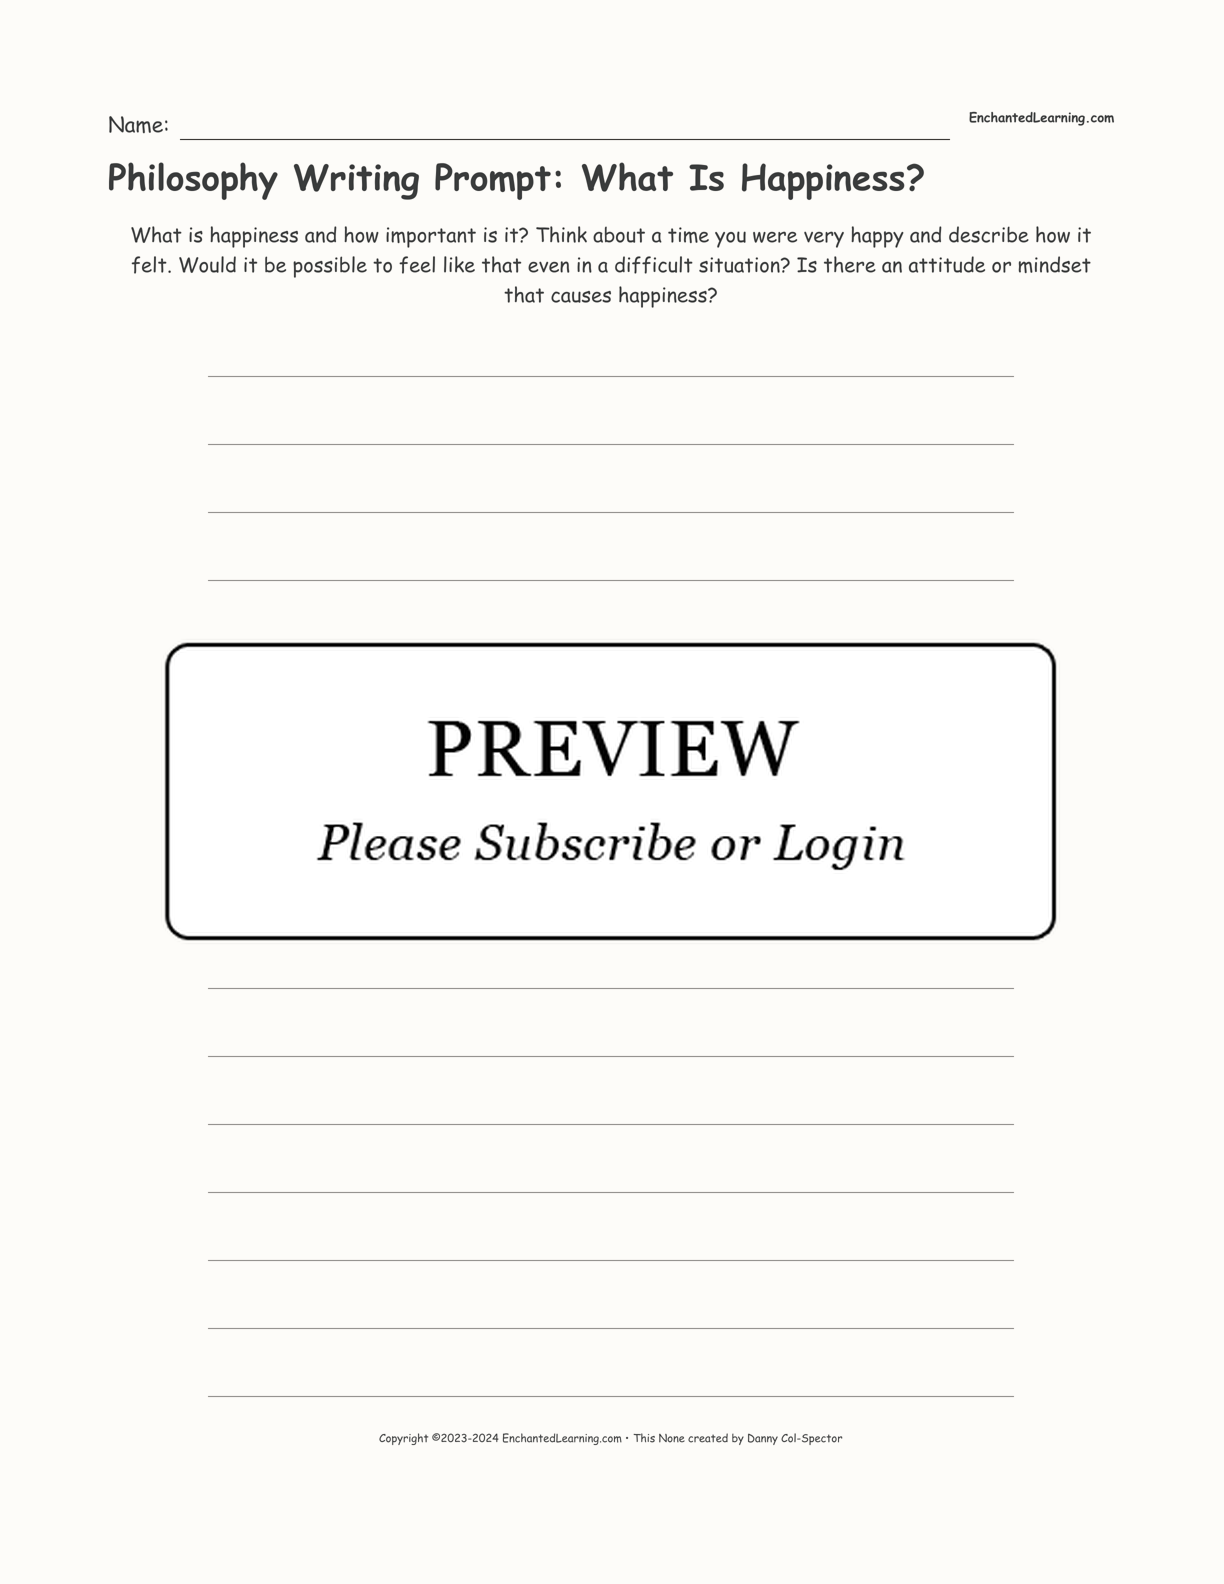 Philosophy Writing Prompt: What Is Happiness? interactive printout page 1